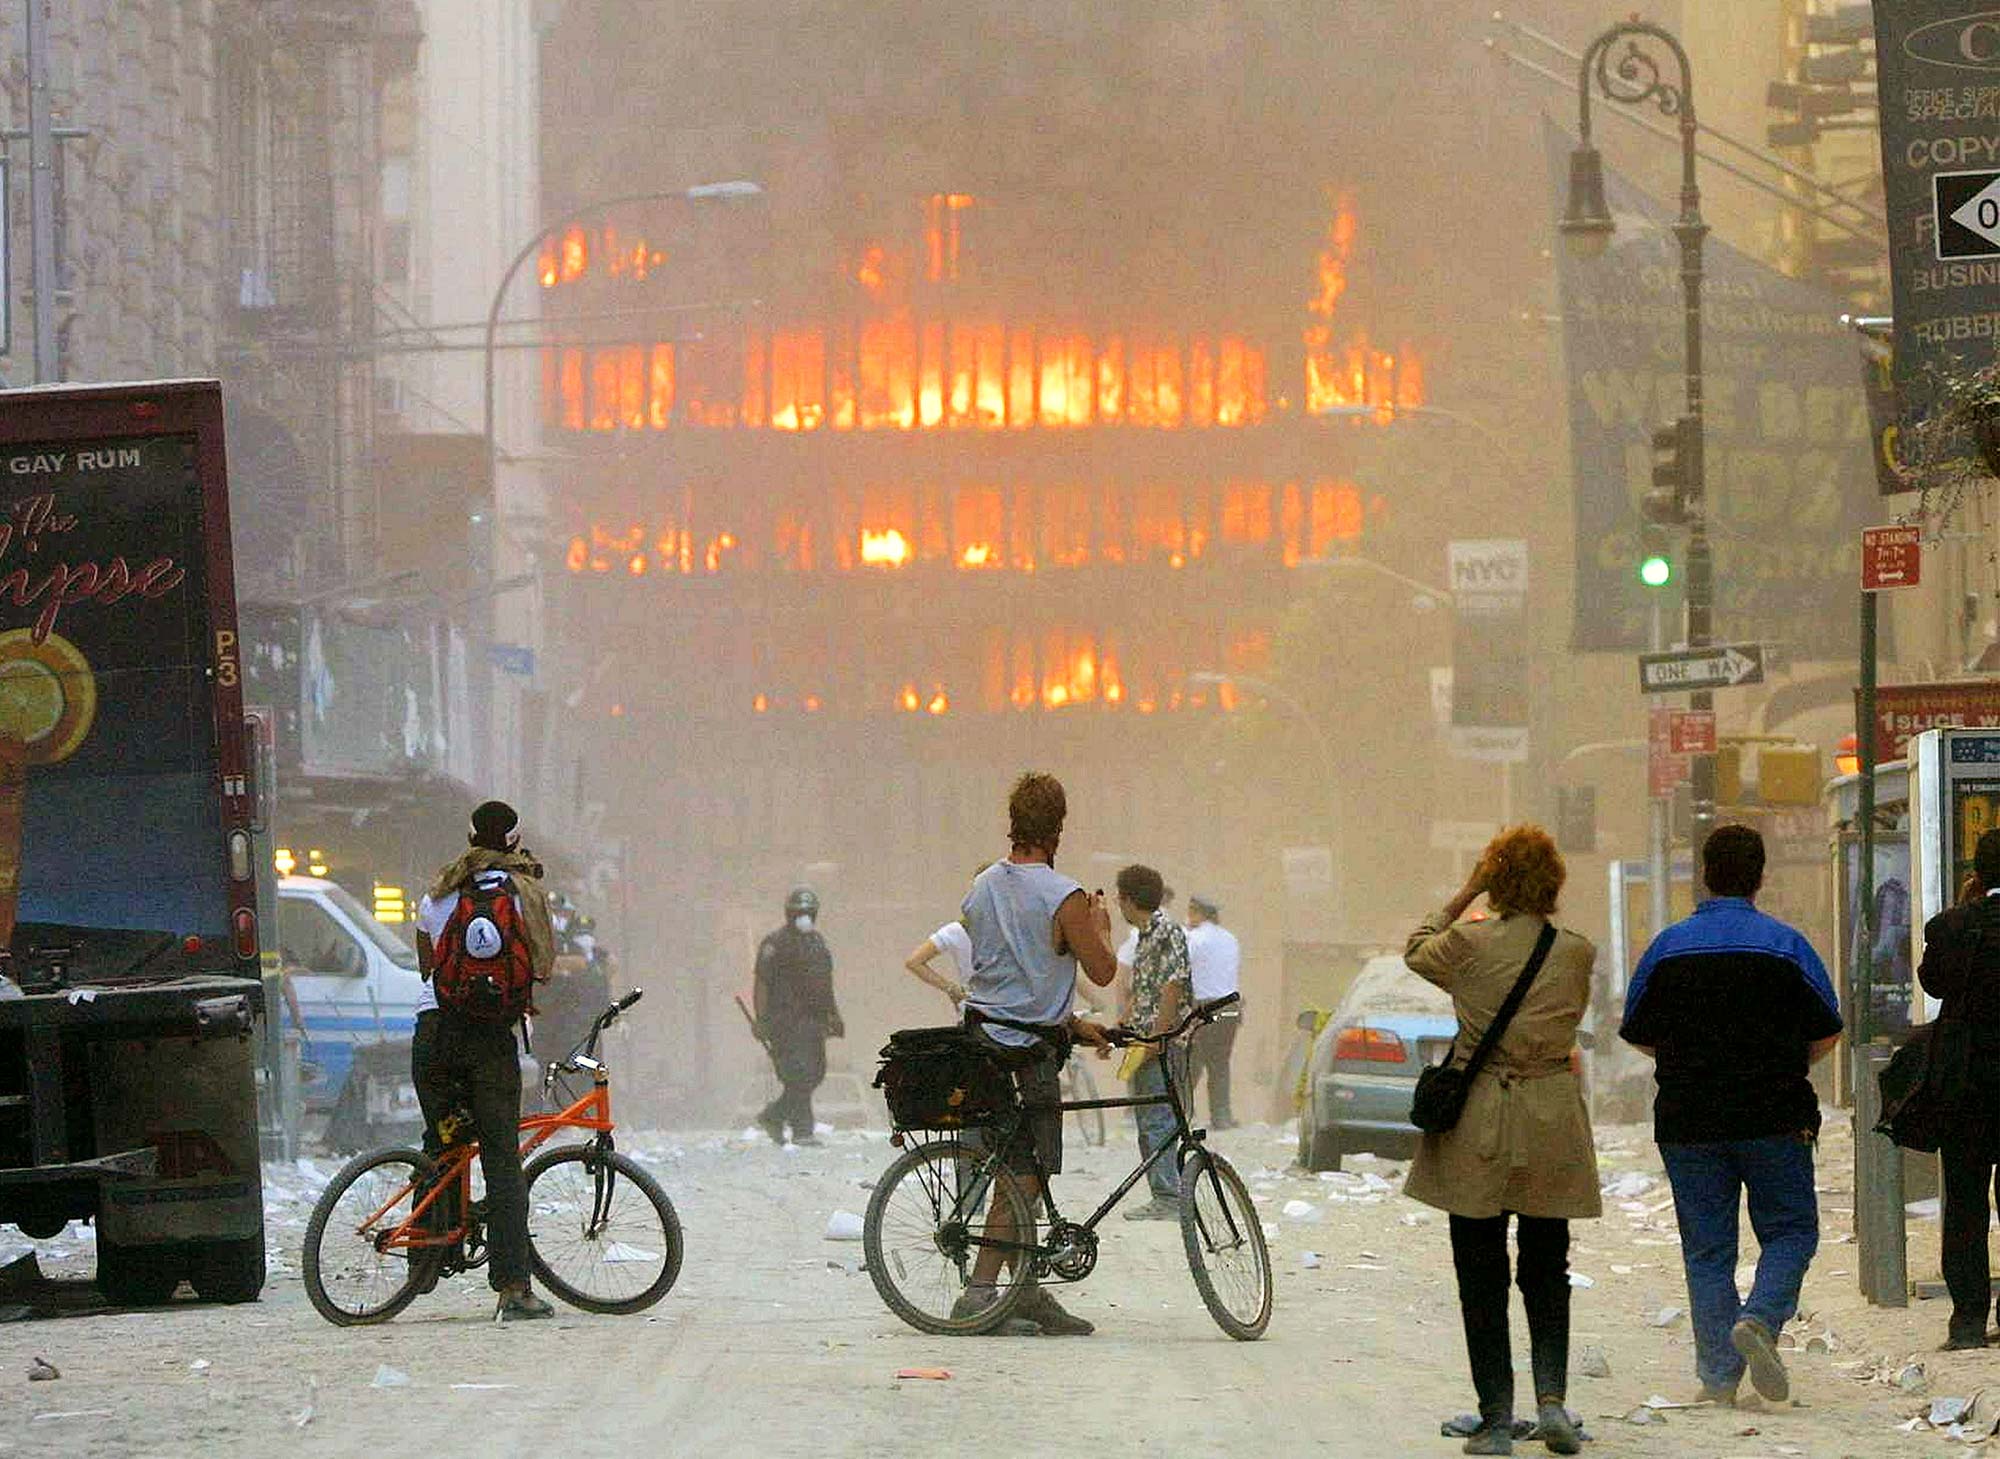 Photo of two people on bikes and other bystanders looking towards the twin towers as they burn. The air is filled with ash and the photo is very hazy.